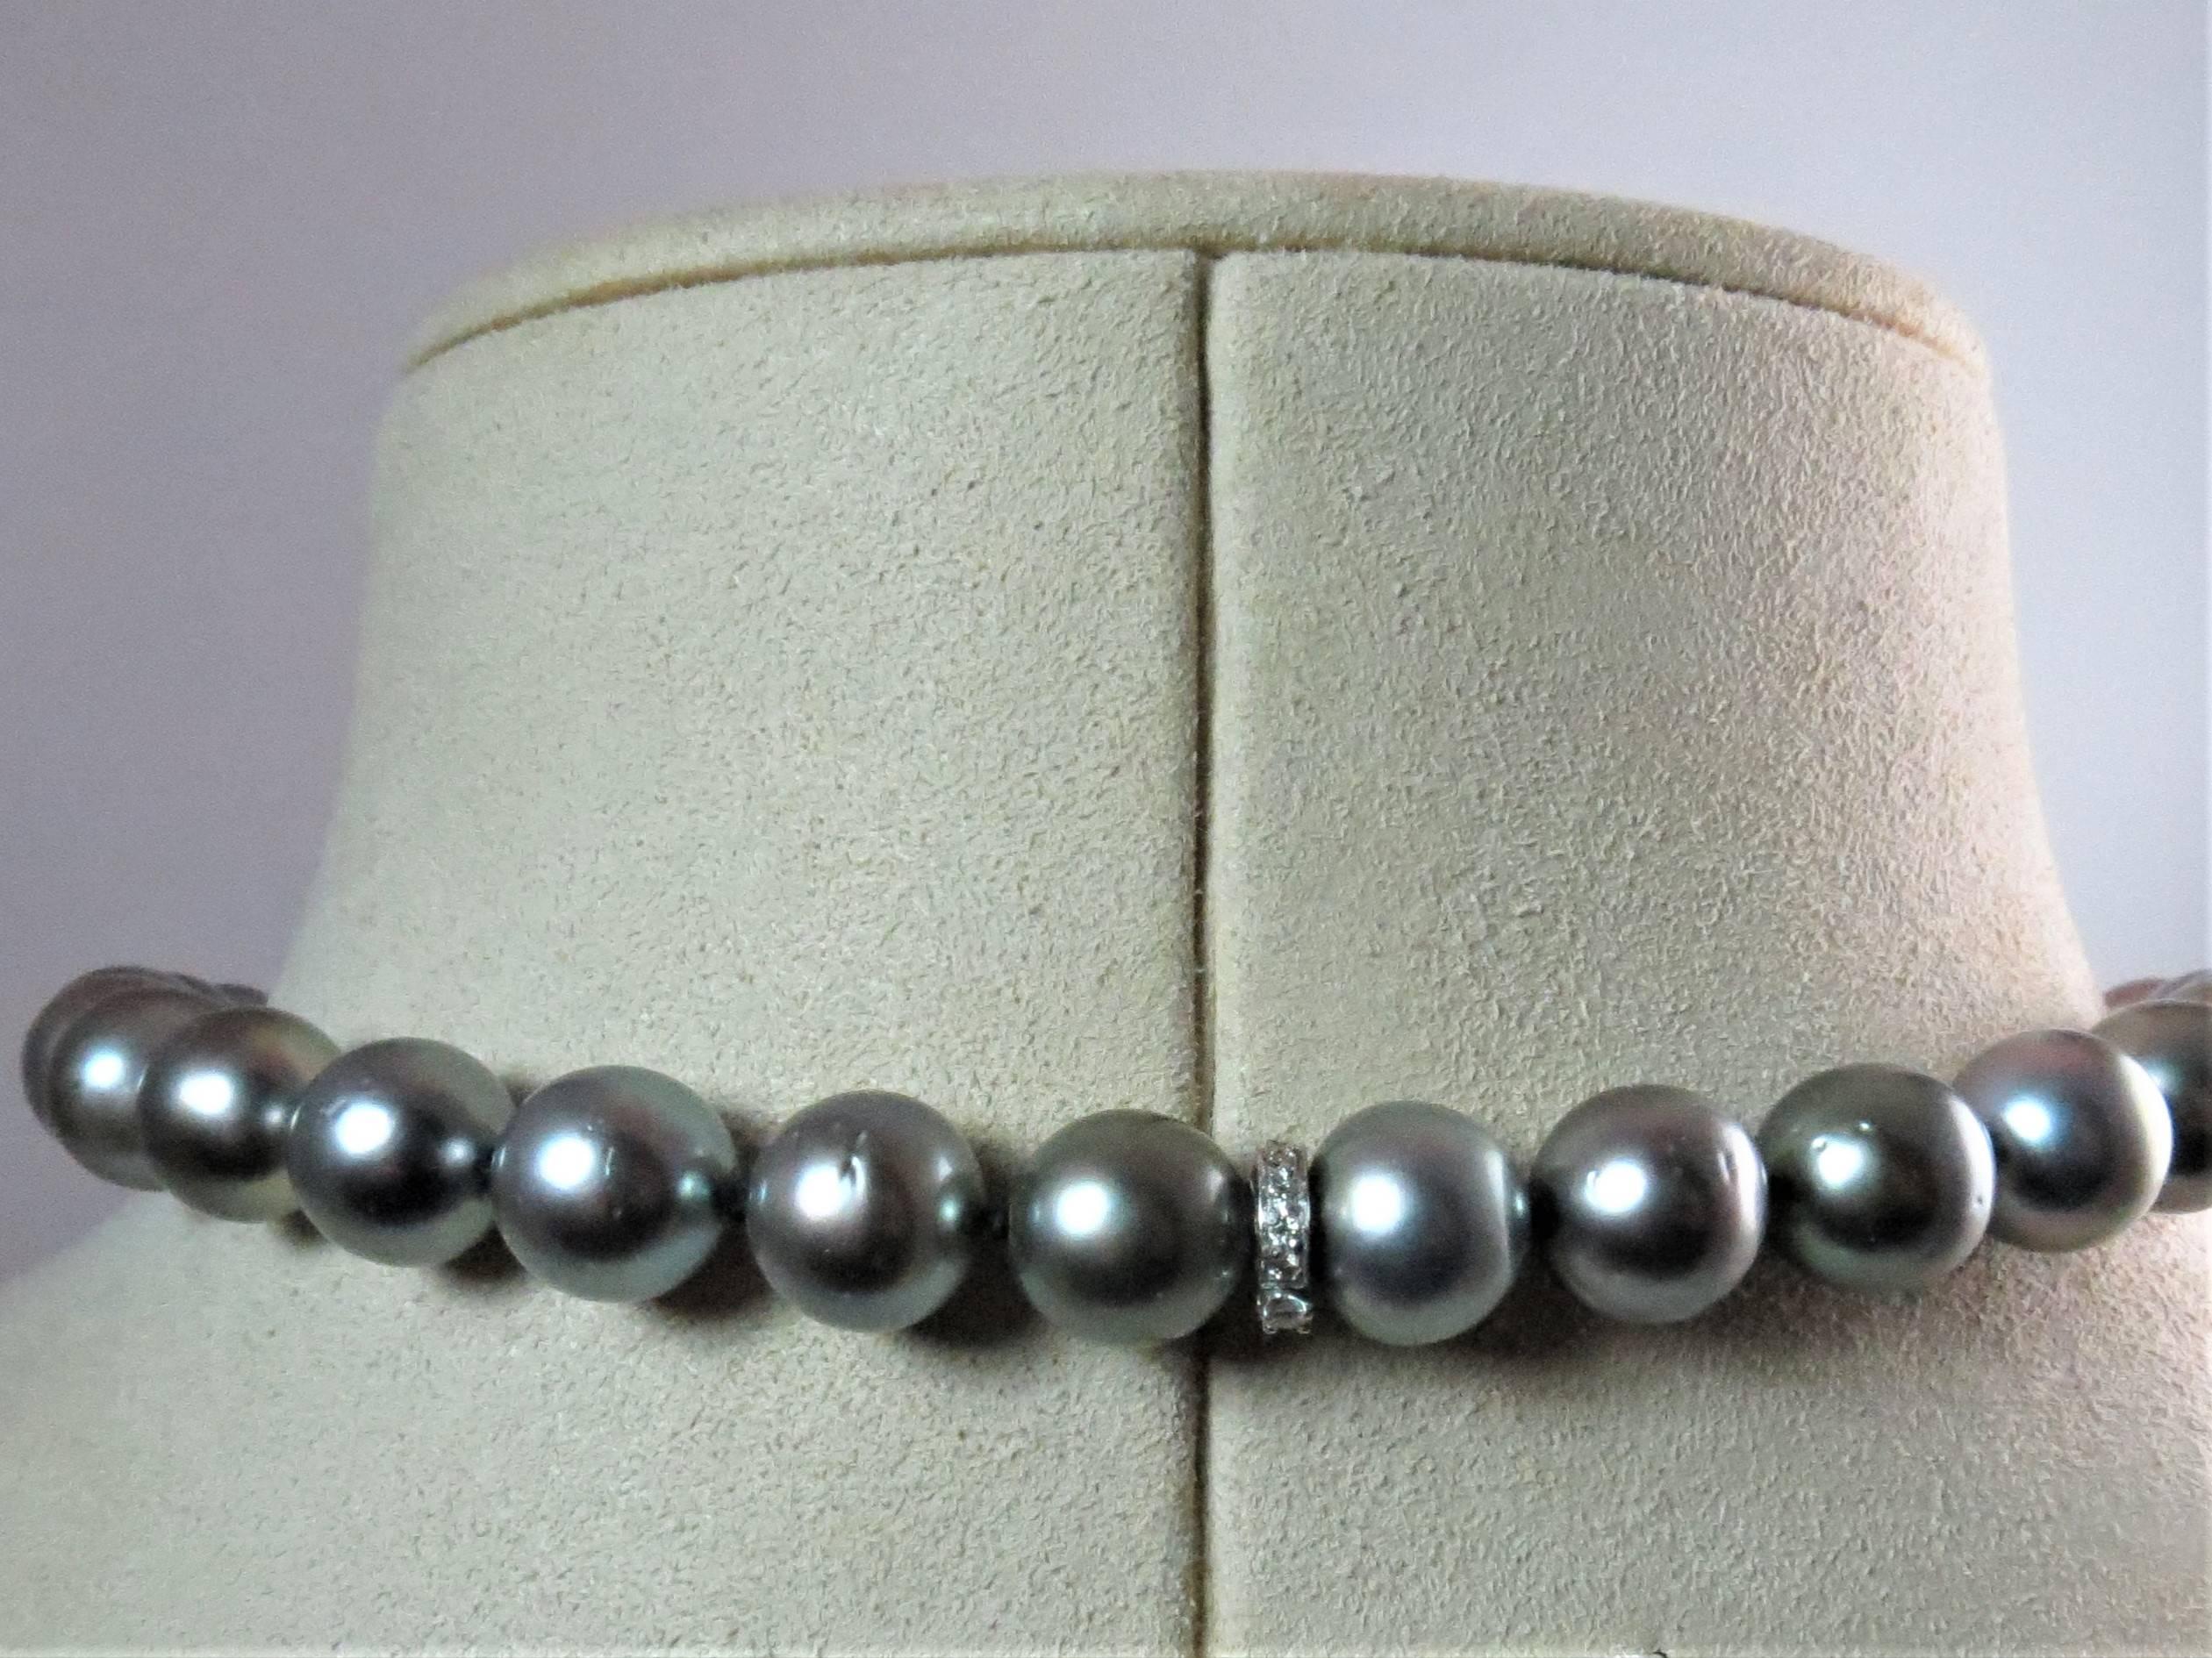 Graduated Tahitian black pearl necklace, with 37 black Tahitian pearls measuring 14.50mm to 10mm, 18 inches long, beautiful luster, with platinum diamond plunger clasp prong set with 13 full cut round diamonds weighing 0.15cts, H-I color, VS- SI1